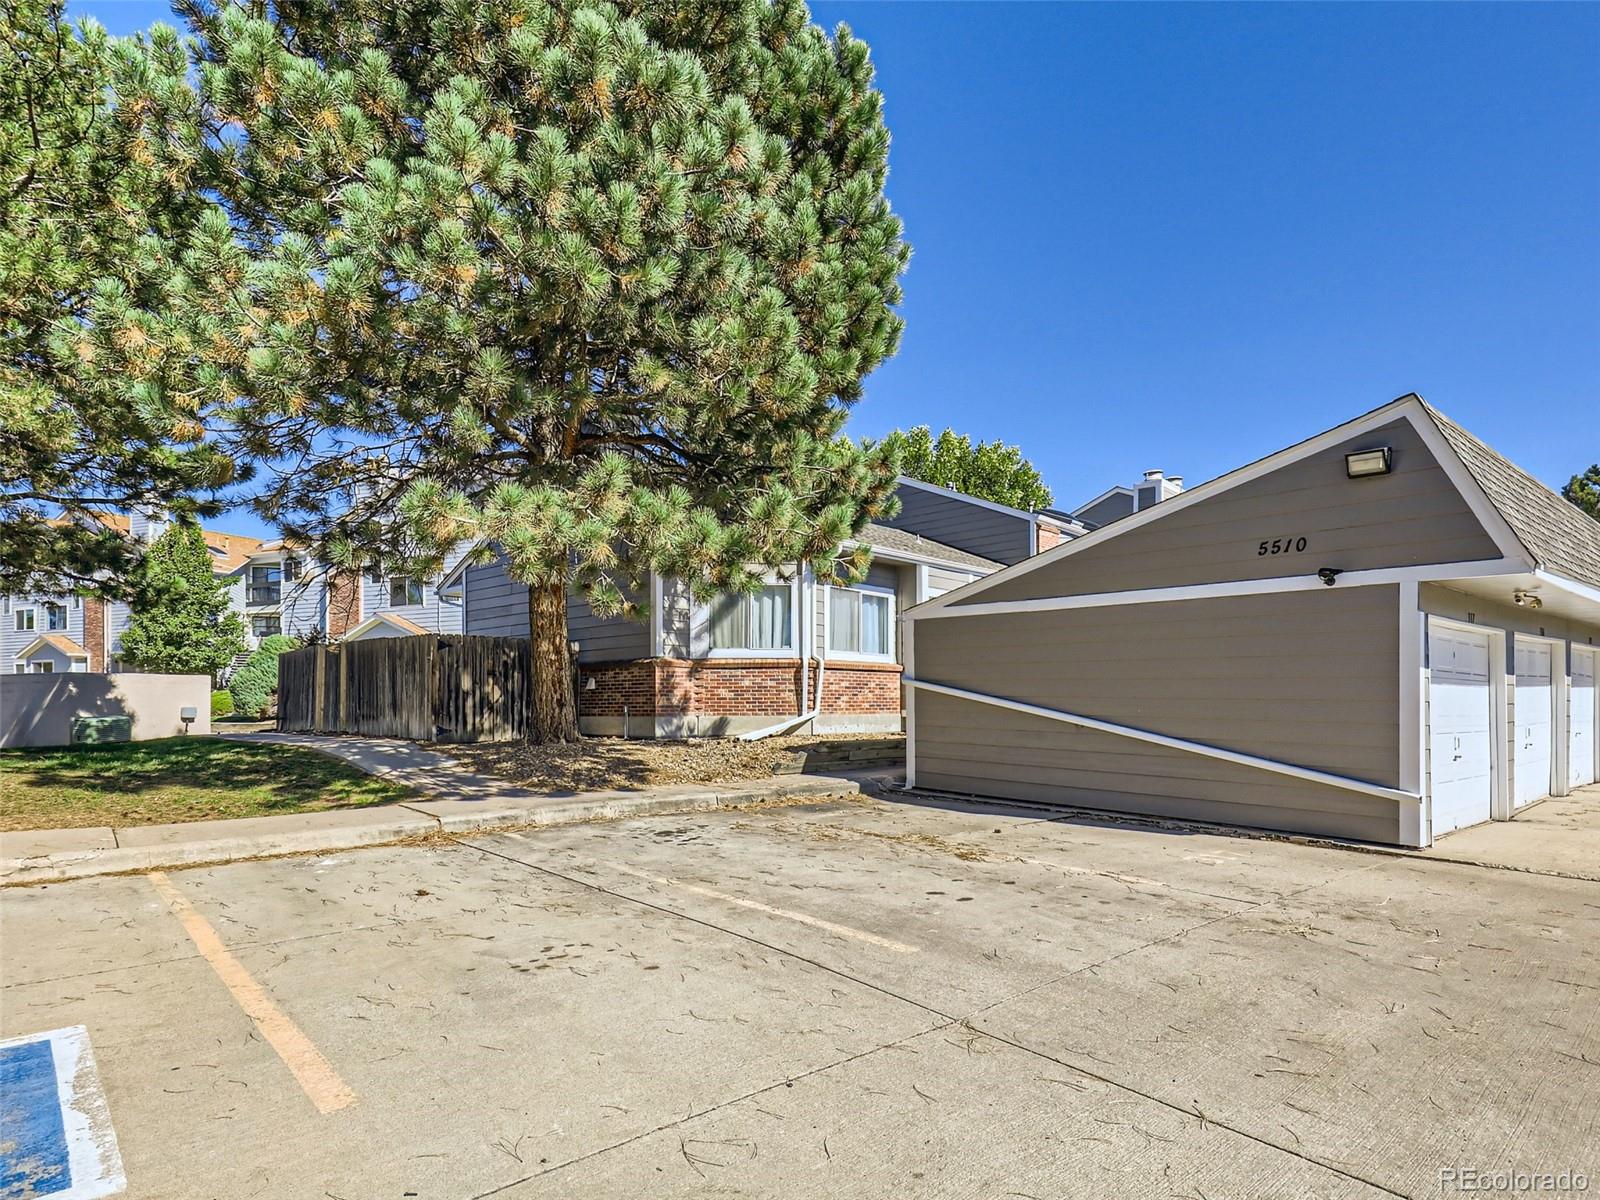 Report Image for 5510 W 80th Place,Arvada, Colorado